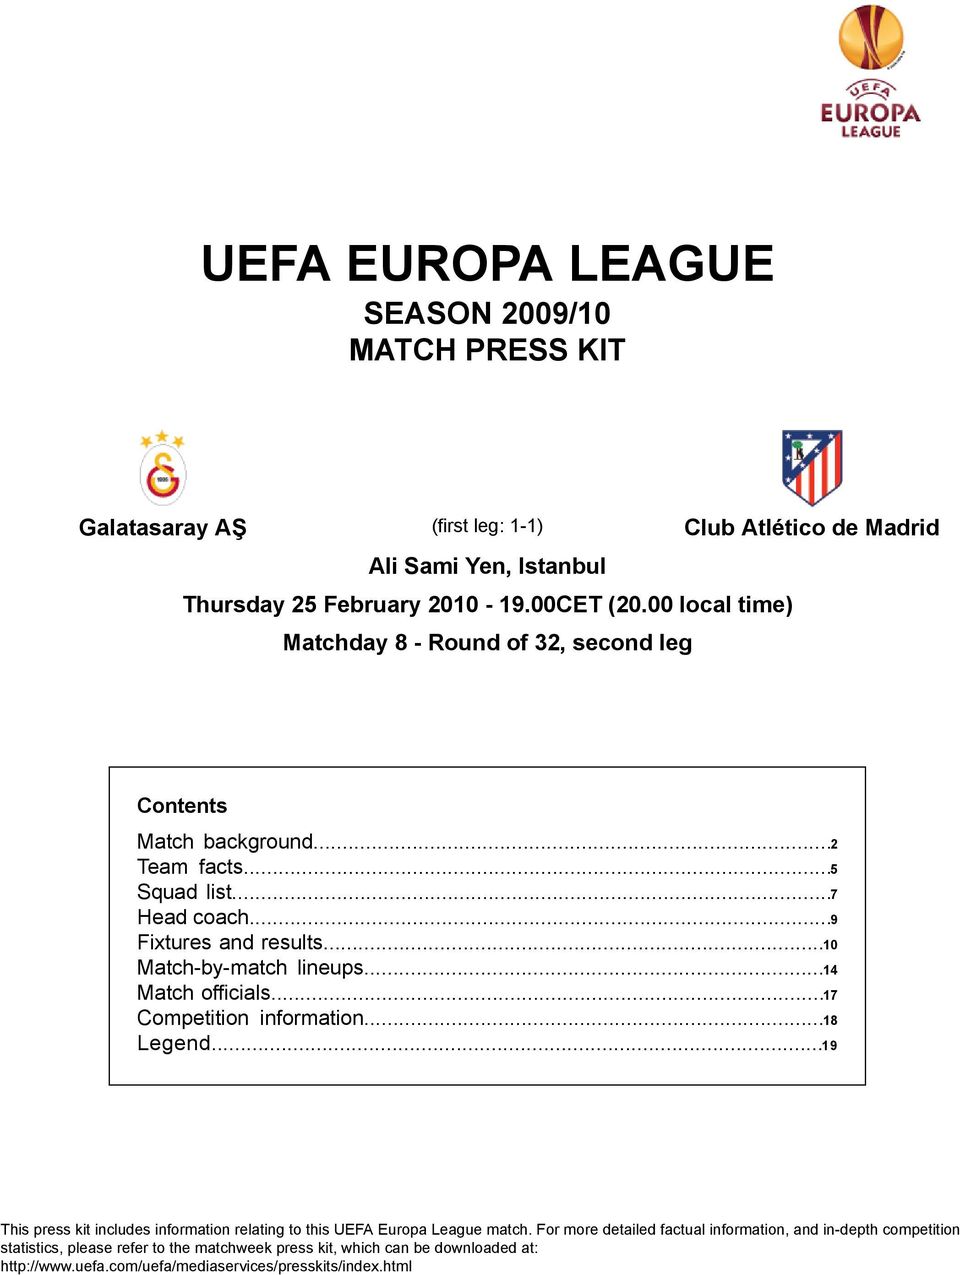 .. officials... Competition information... egend... This press kit includes information relating to this UEFA Europa match.